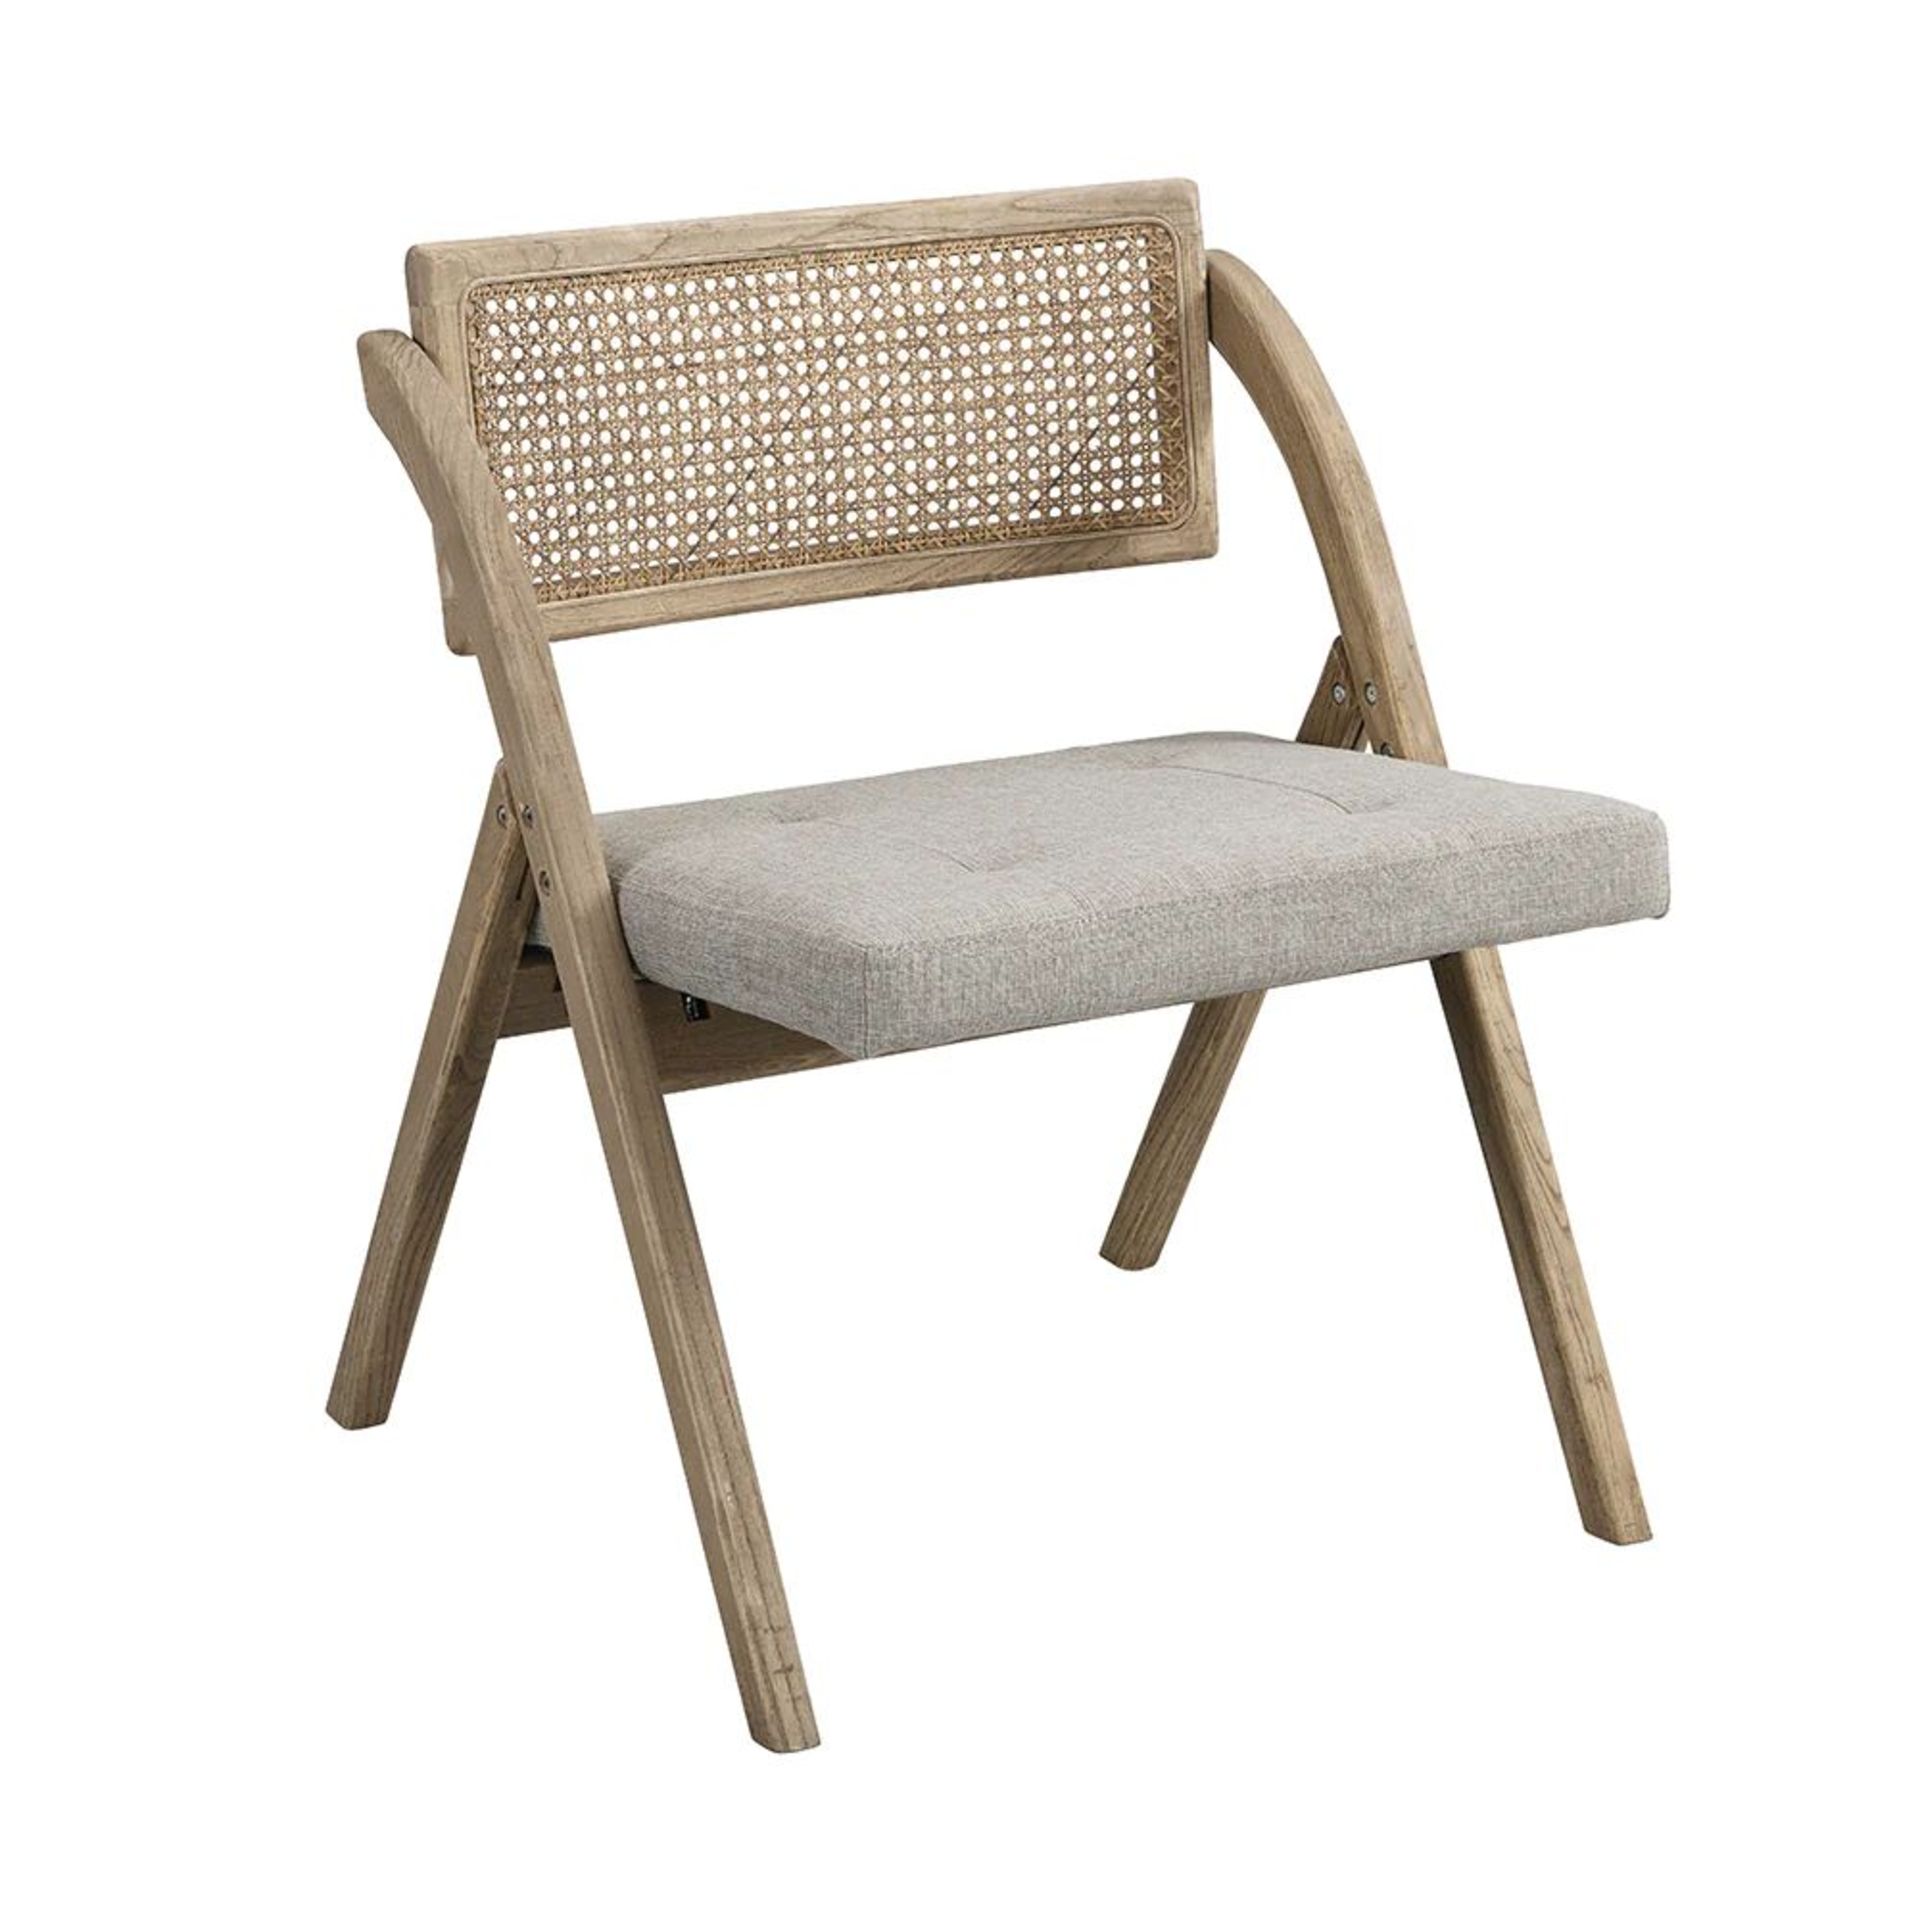 Bordon Natural Cane Rattan Folding Chair with Grey Upholstered Seat. -Er30. RRP £189.99. Made from - Image 2 of 2